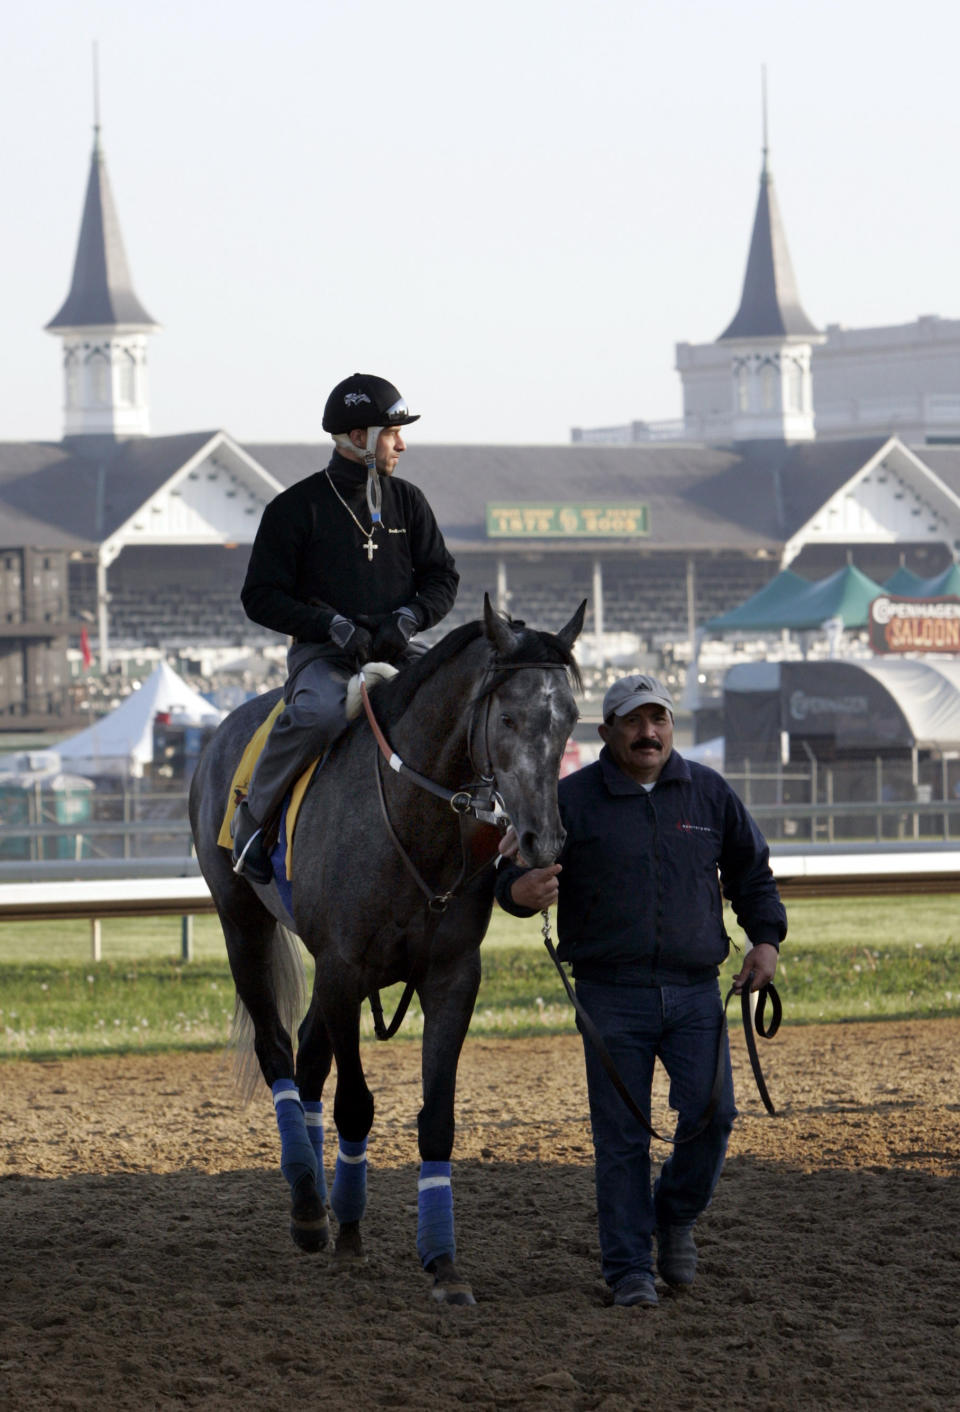 FILE - Kentucky Derby entrant Giacomo, with exercise rider Frankie Herrate up, is led off the track Friday, May 6, 2005 at Churchill Downs in Louisville, Ky. (AP Photo/Al Behrman, File)